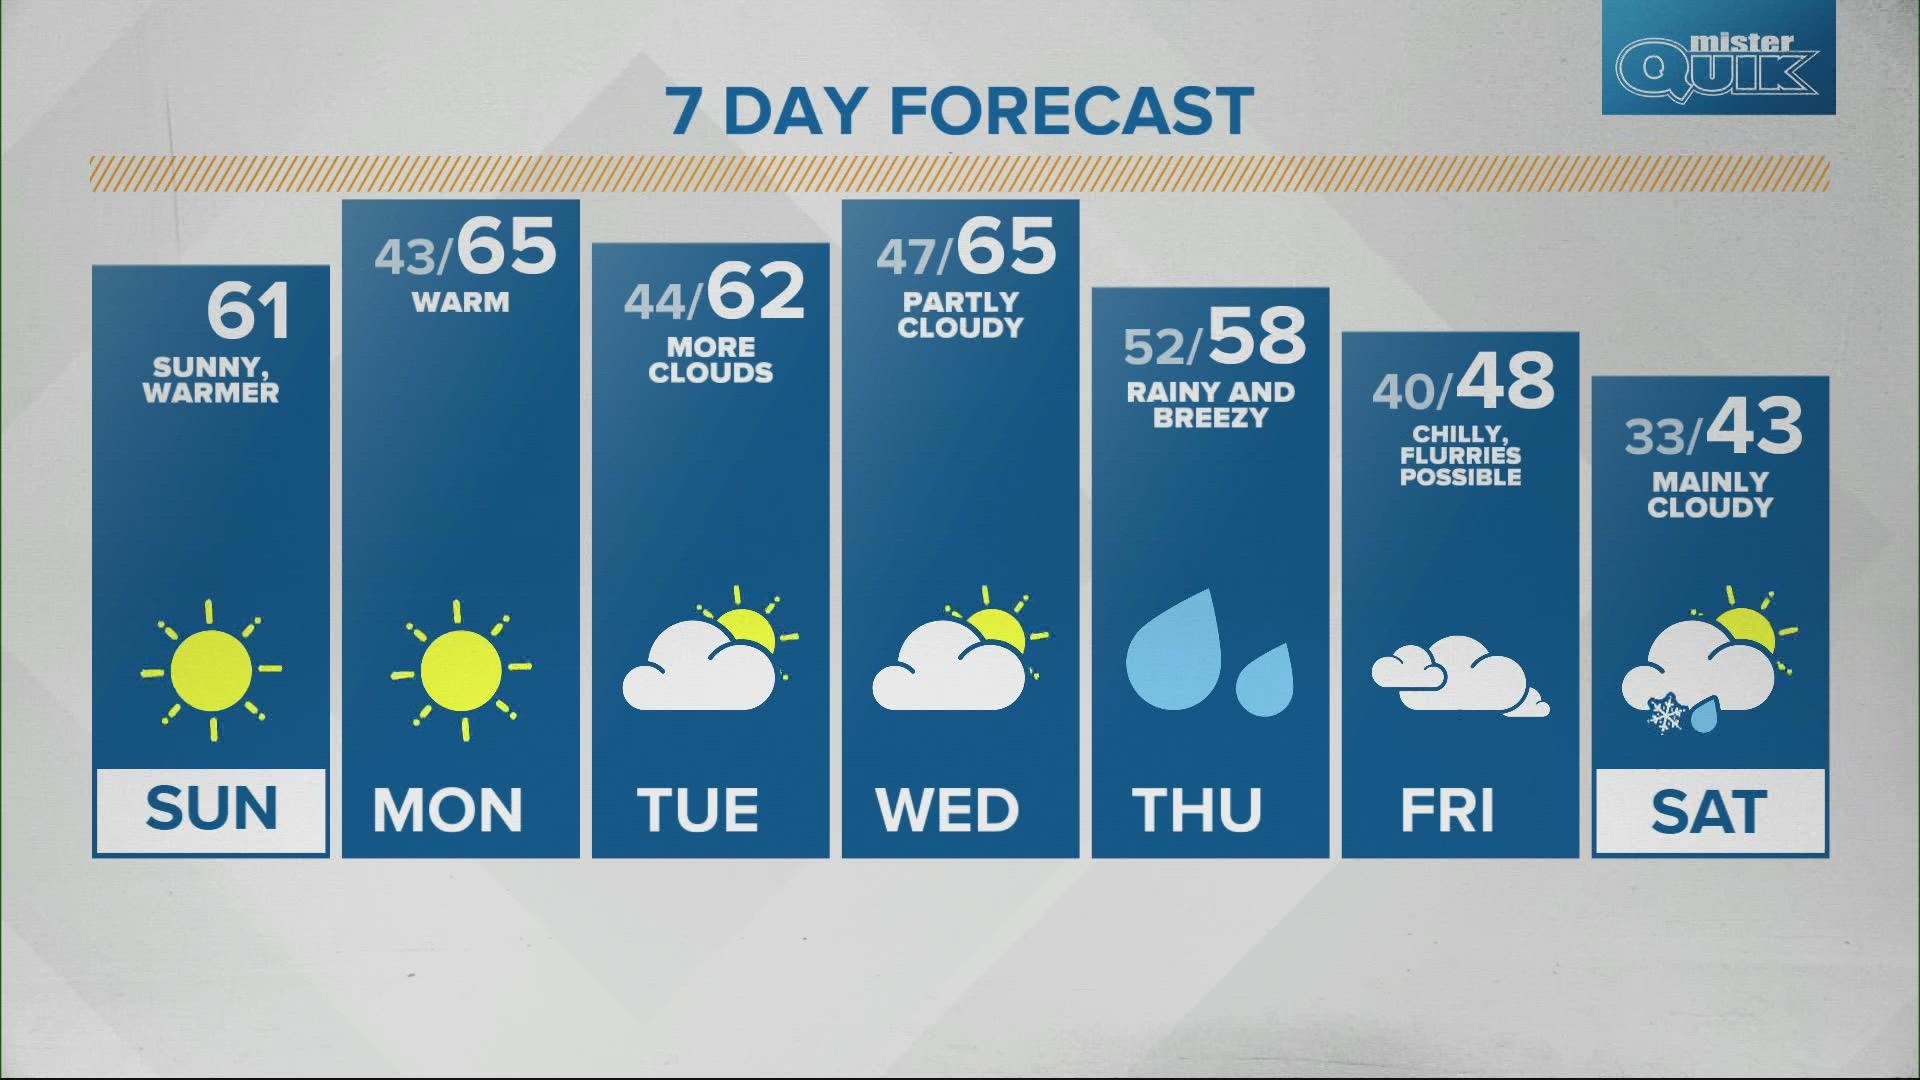 Temperatures reach 60 today and highs stay there through the middle of the week.